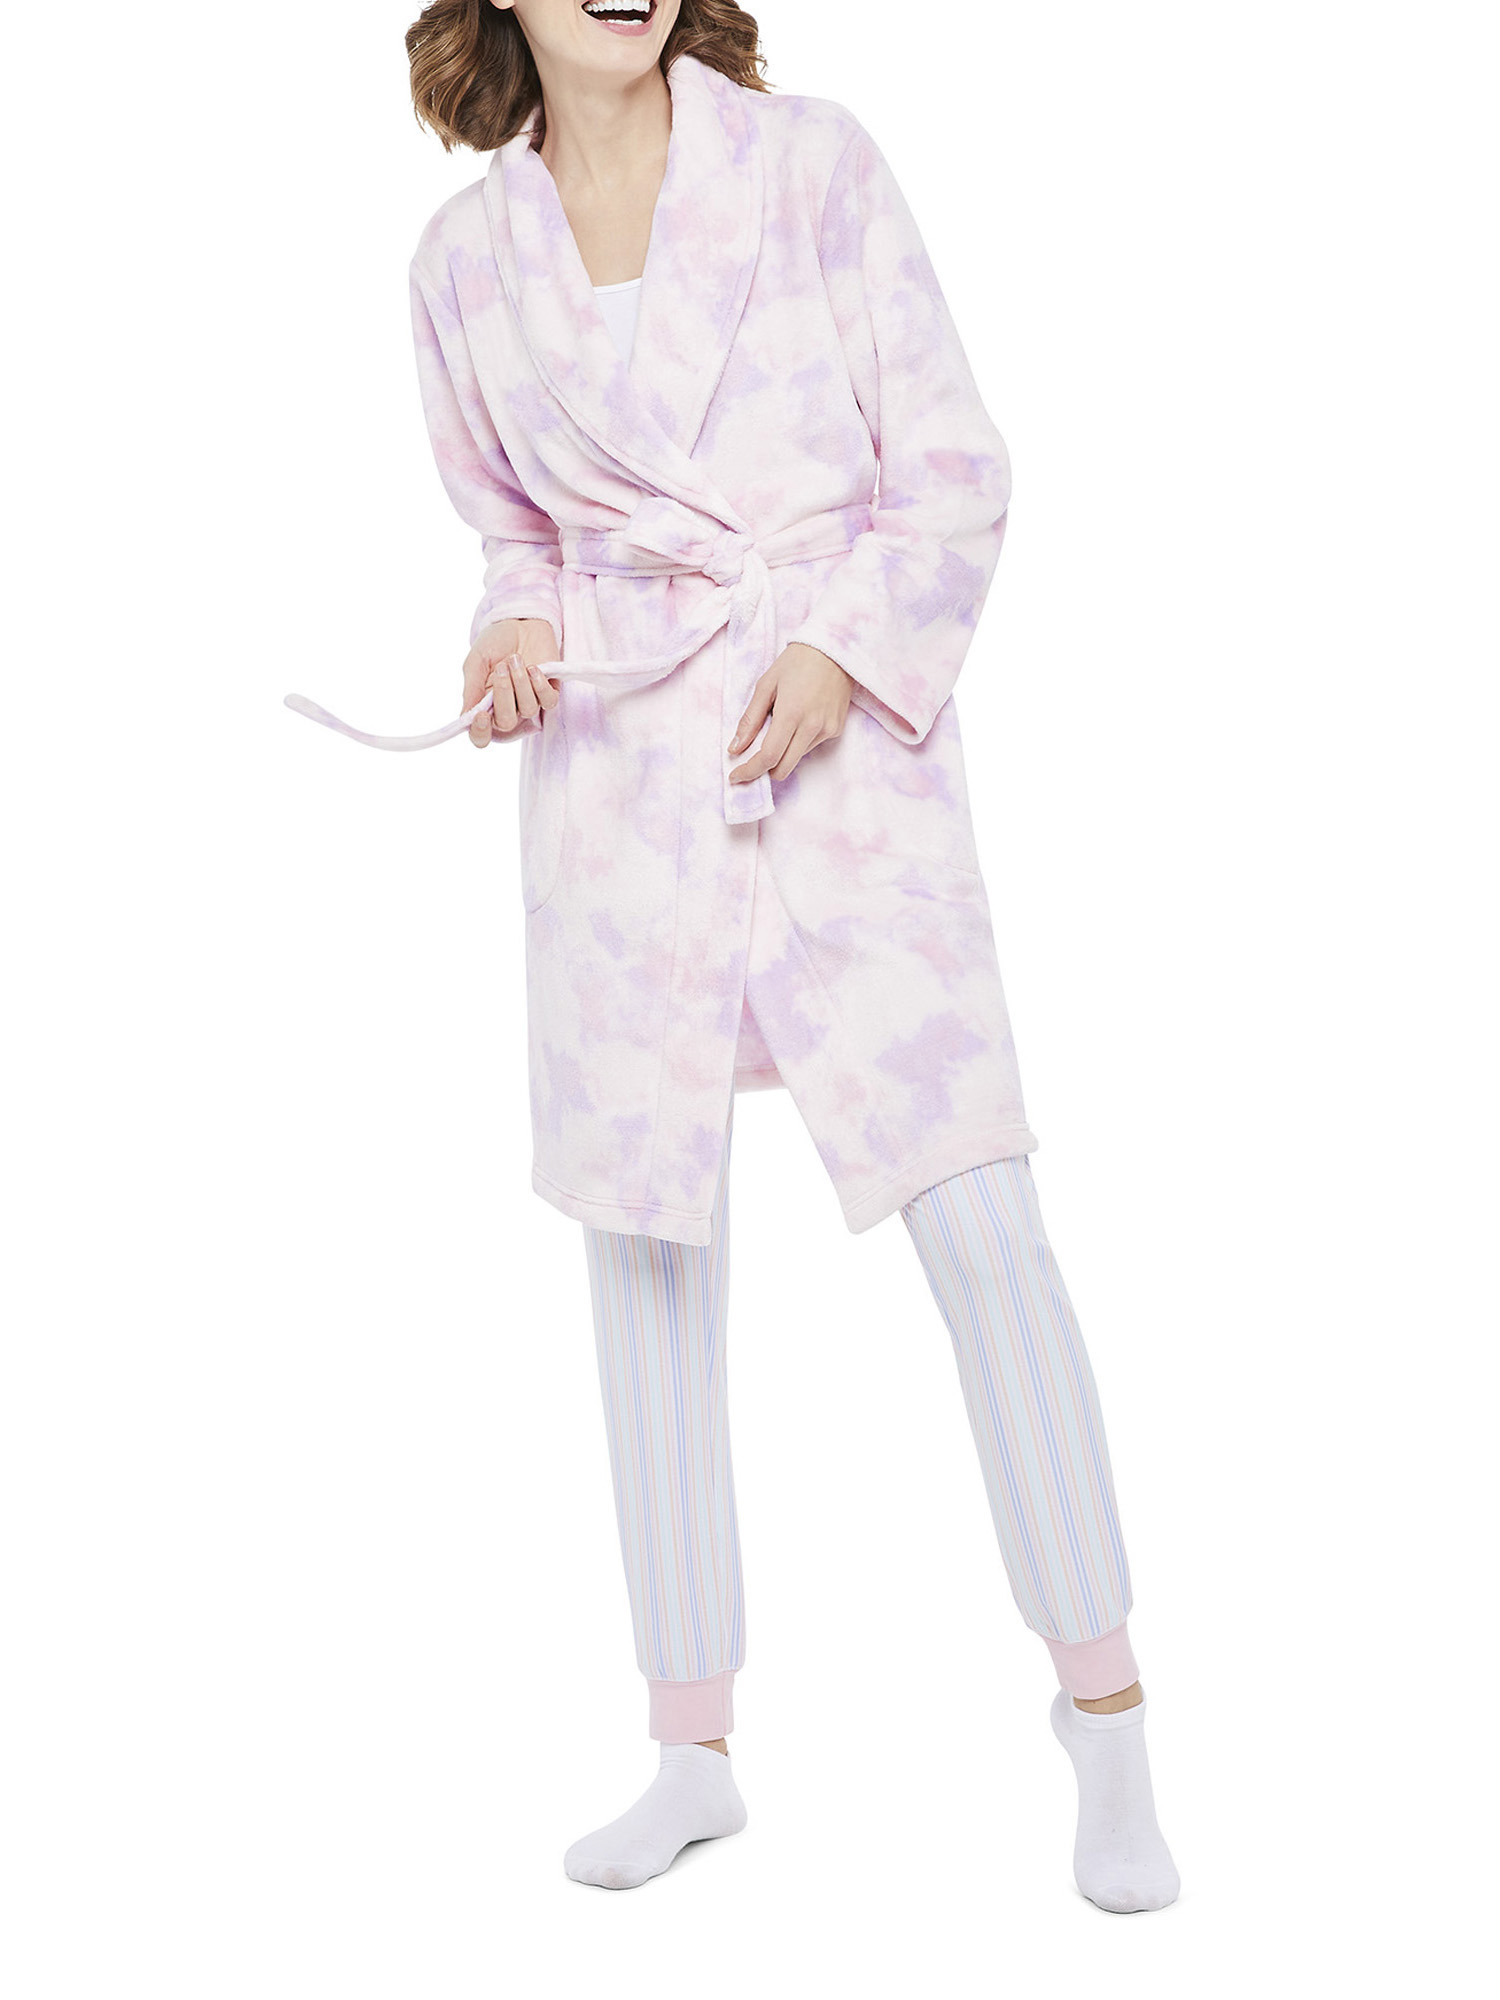 George Women's and Women's Plus Robe - image 1 of 6